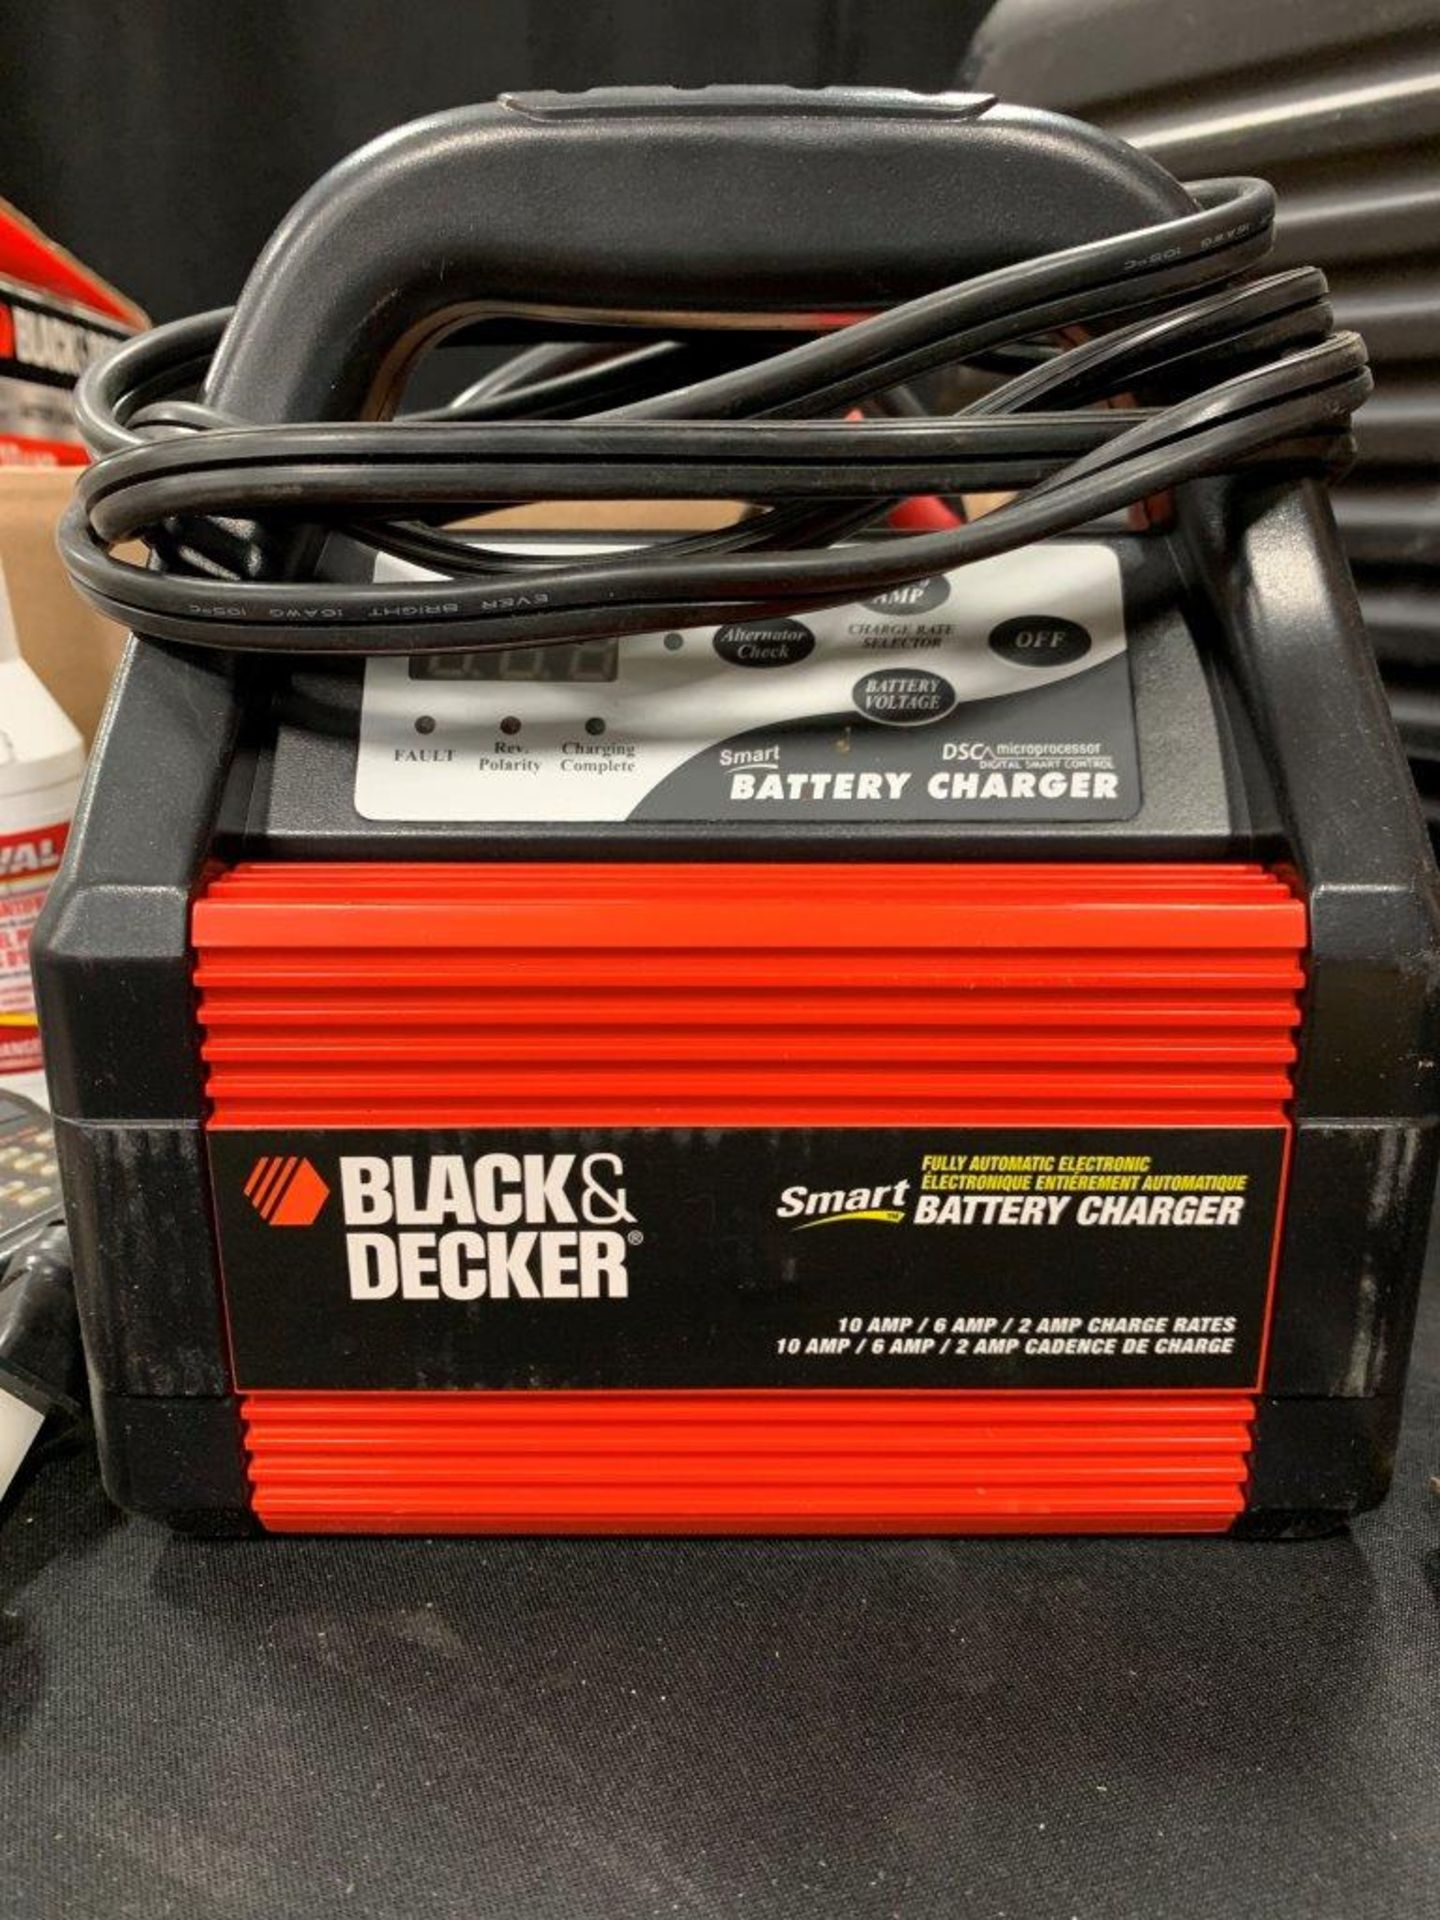 BLACK & DECKER 10 AMP BATTERY CHARGER, AUTOMOTIVE TIRE REPAIR JACK, ASSORTED HAND TOOLS, ETC. - Image 3 of 5